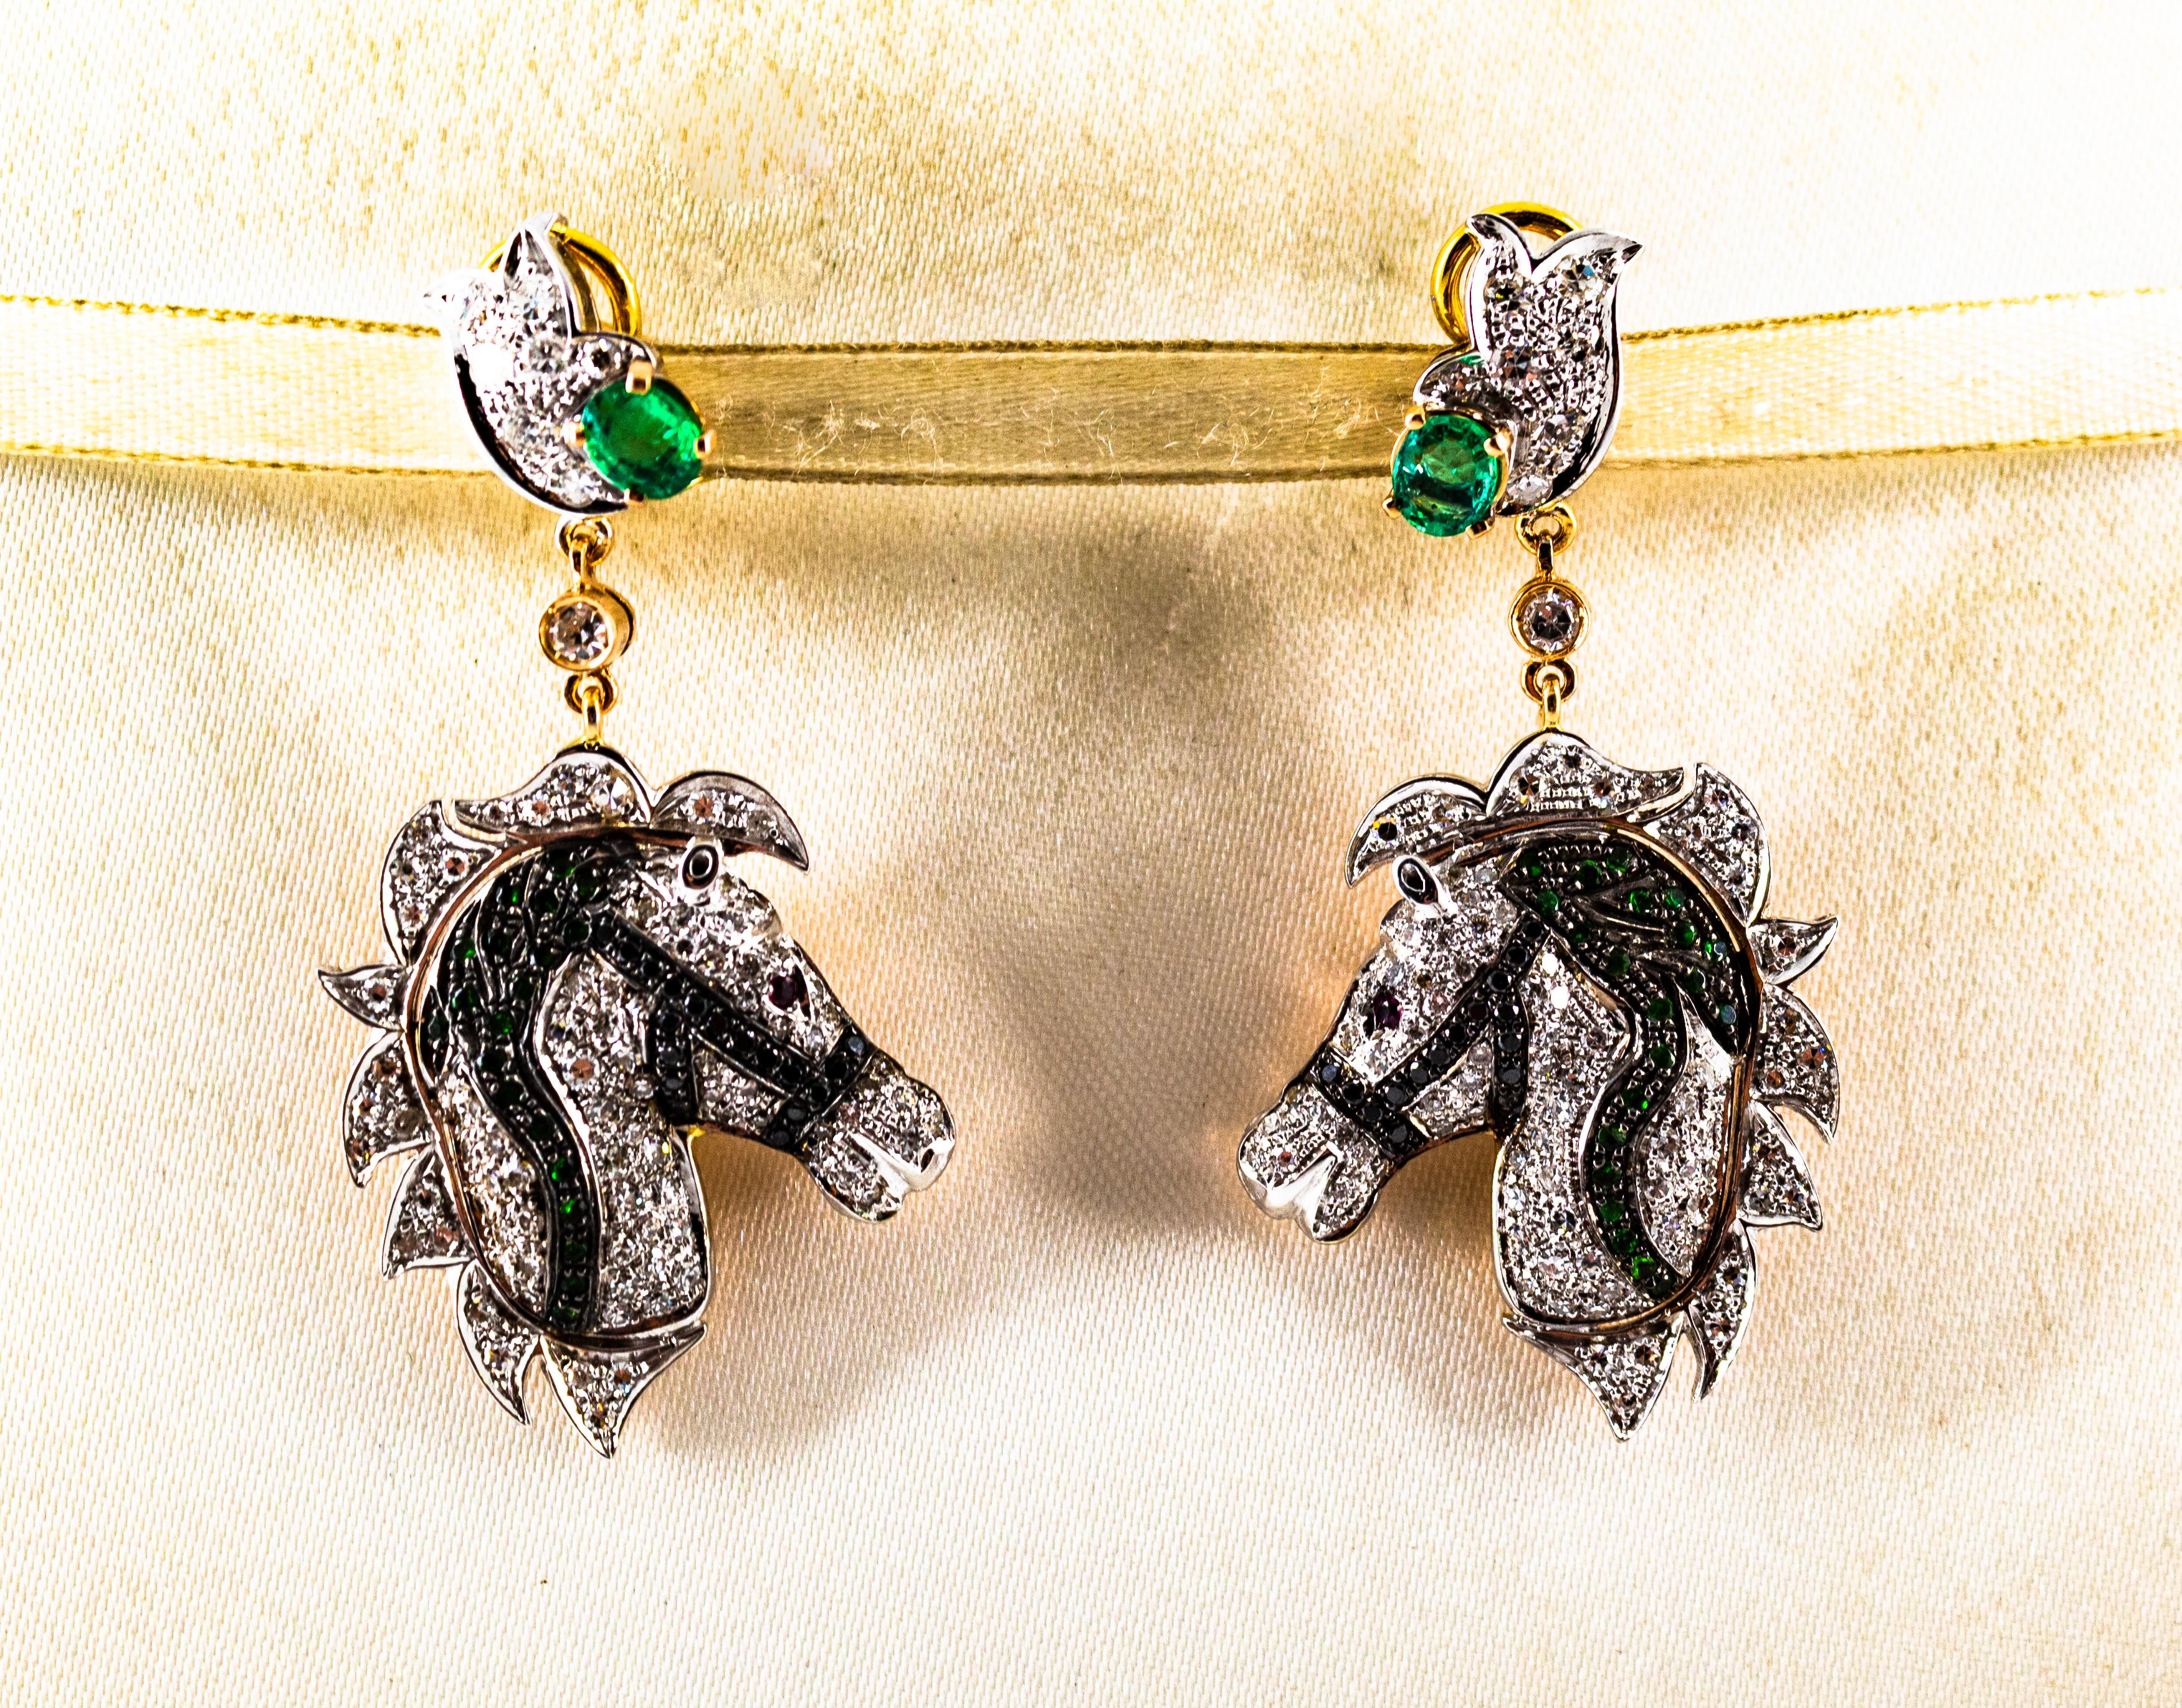 These Earrings are made of 14K Yellow Gold and White Gold.
These Earrings have 1.80 Carats of White Diamonds.
These Earrings have 0.20 Carats of Black Diamonds.
These Earrings have 0.60 Carats of Emeralds.
These Earrings have 0.04 Carats of